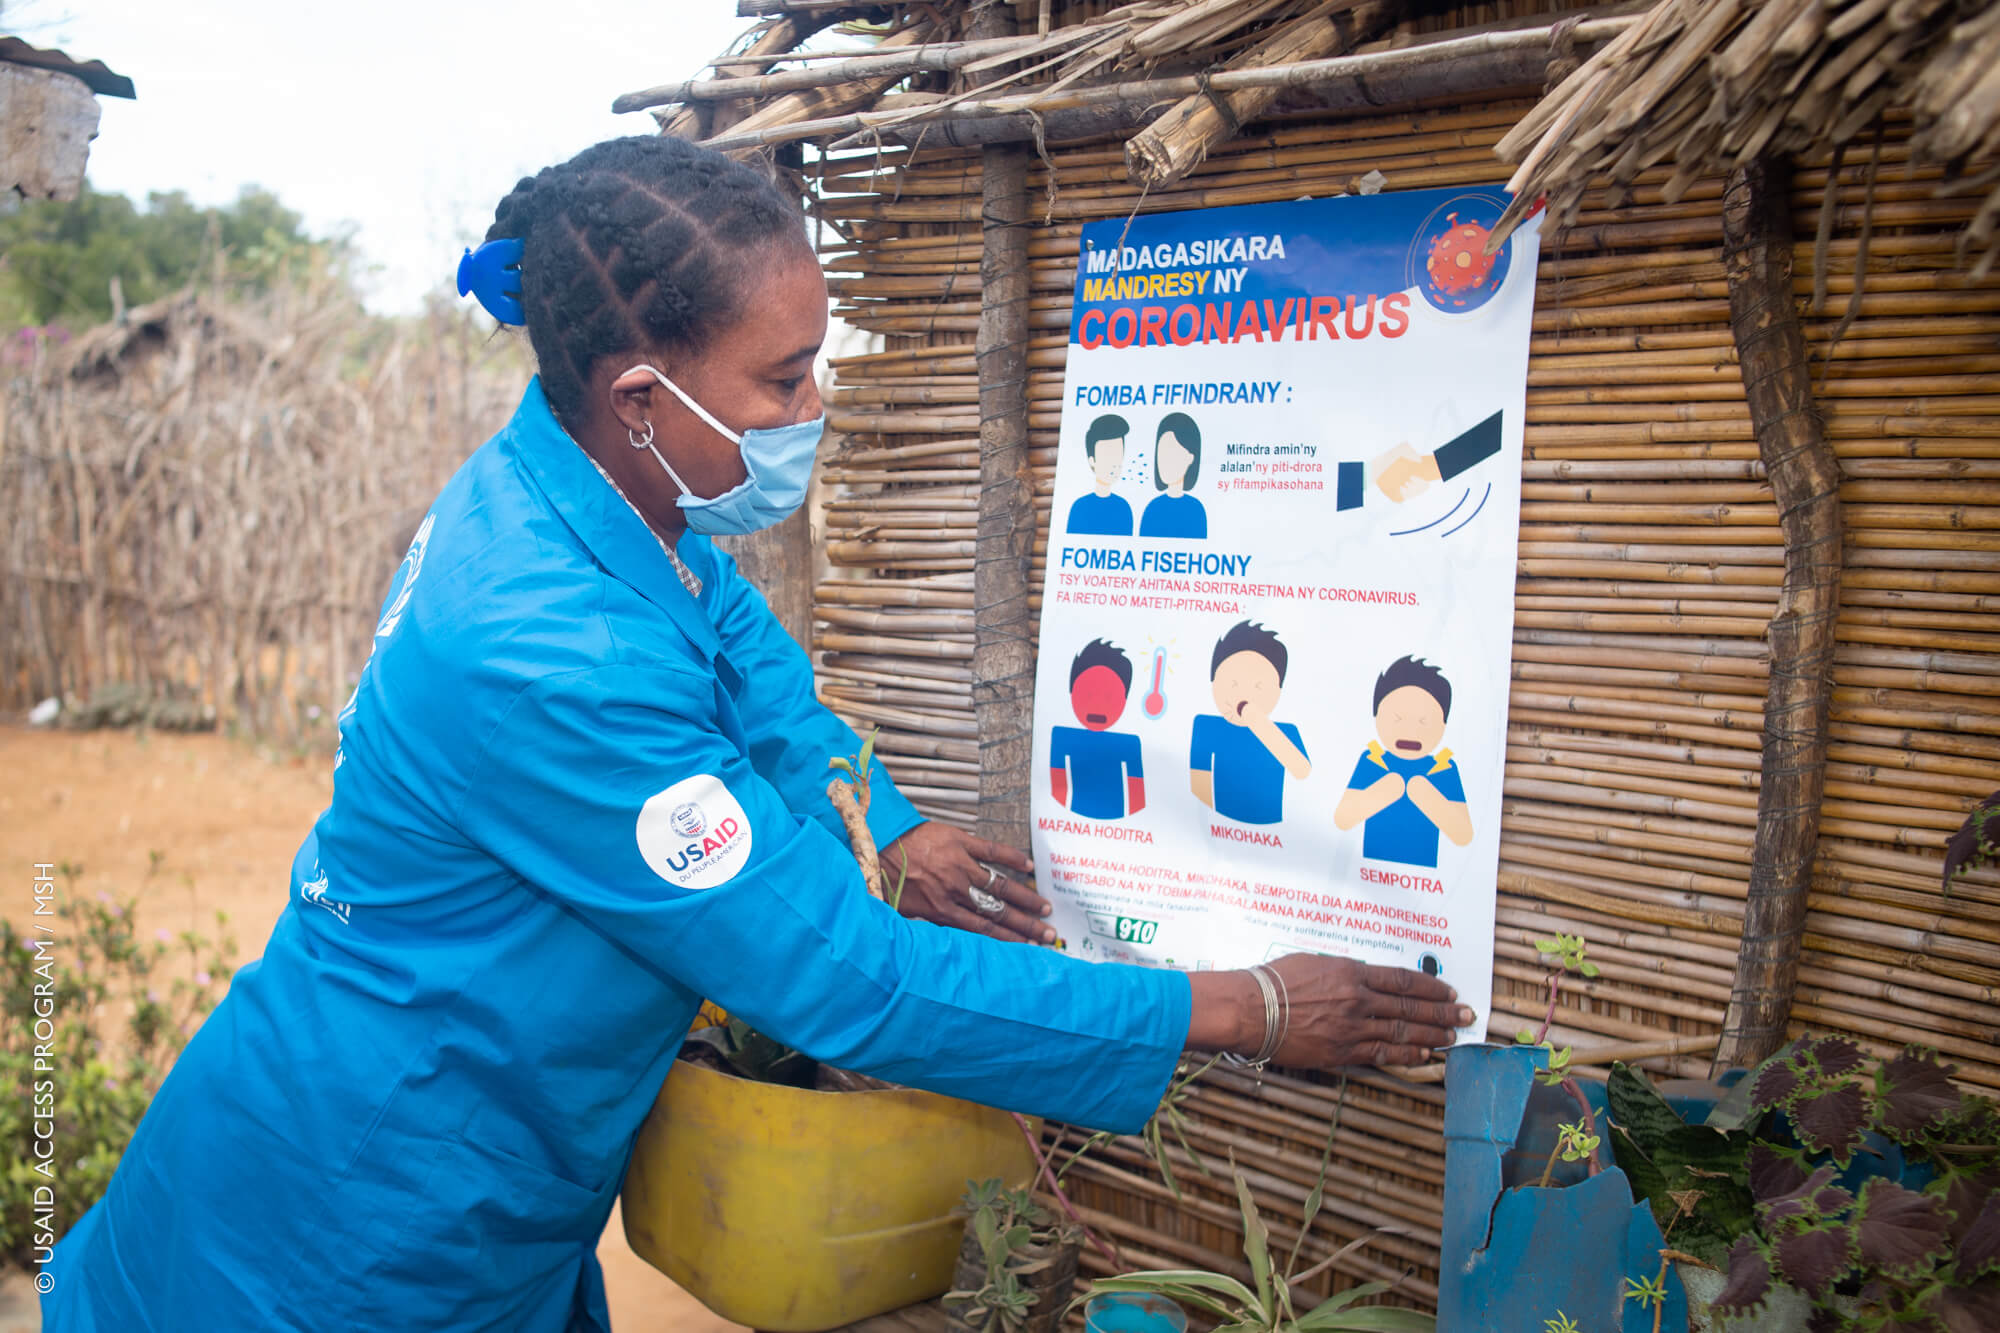 Community Health Worker in Madagascar puts up educational poster about COVID-19 prevention.